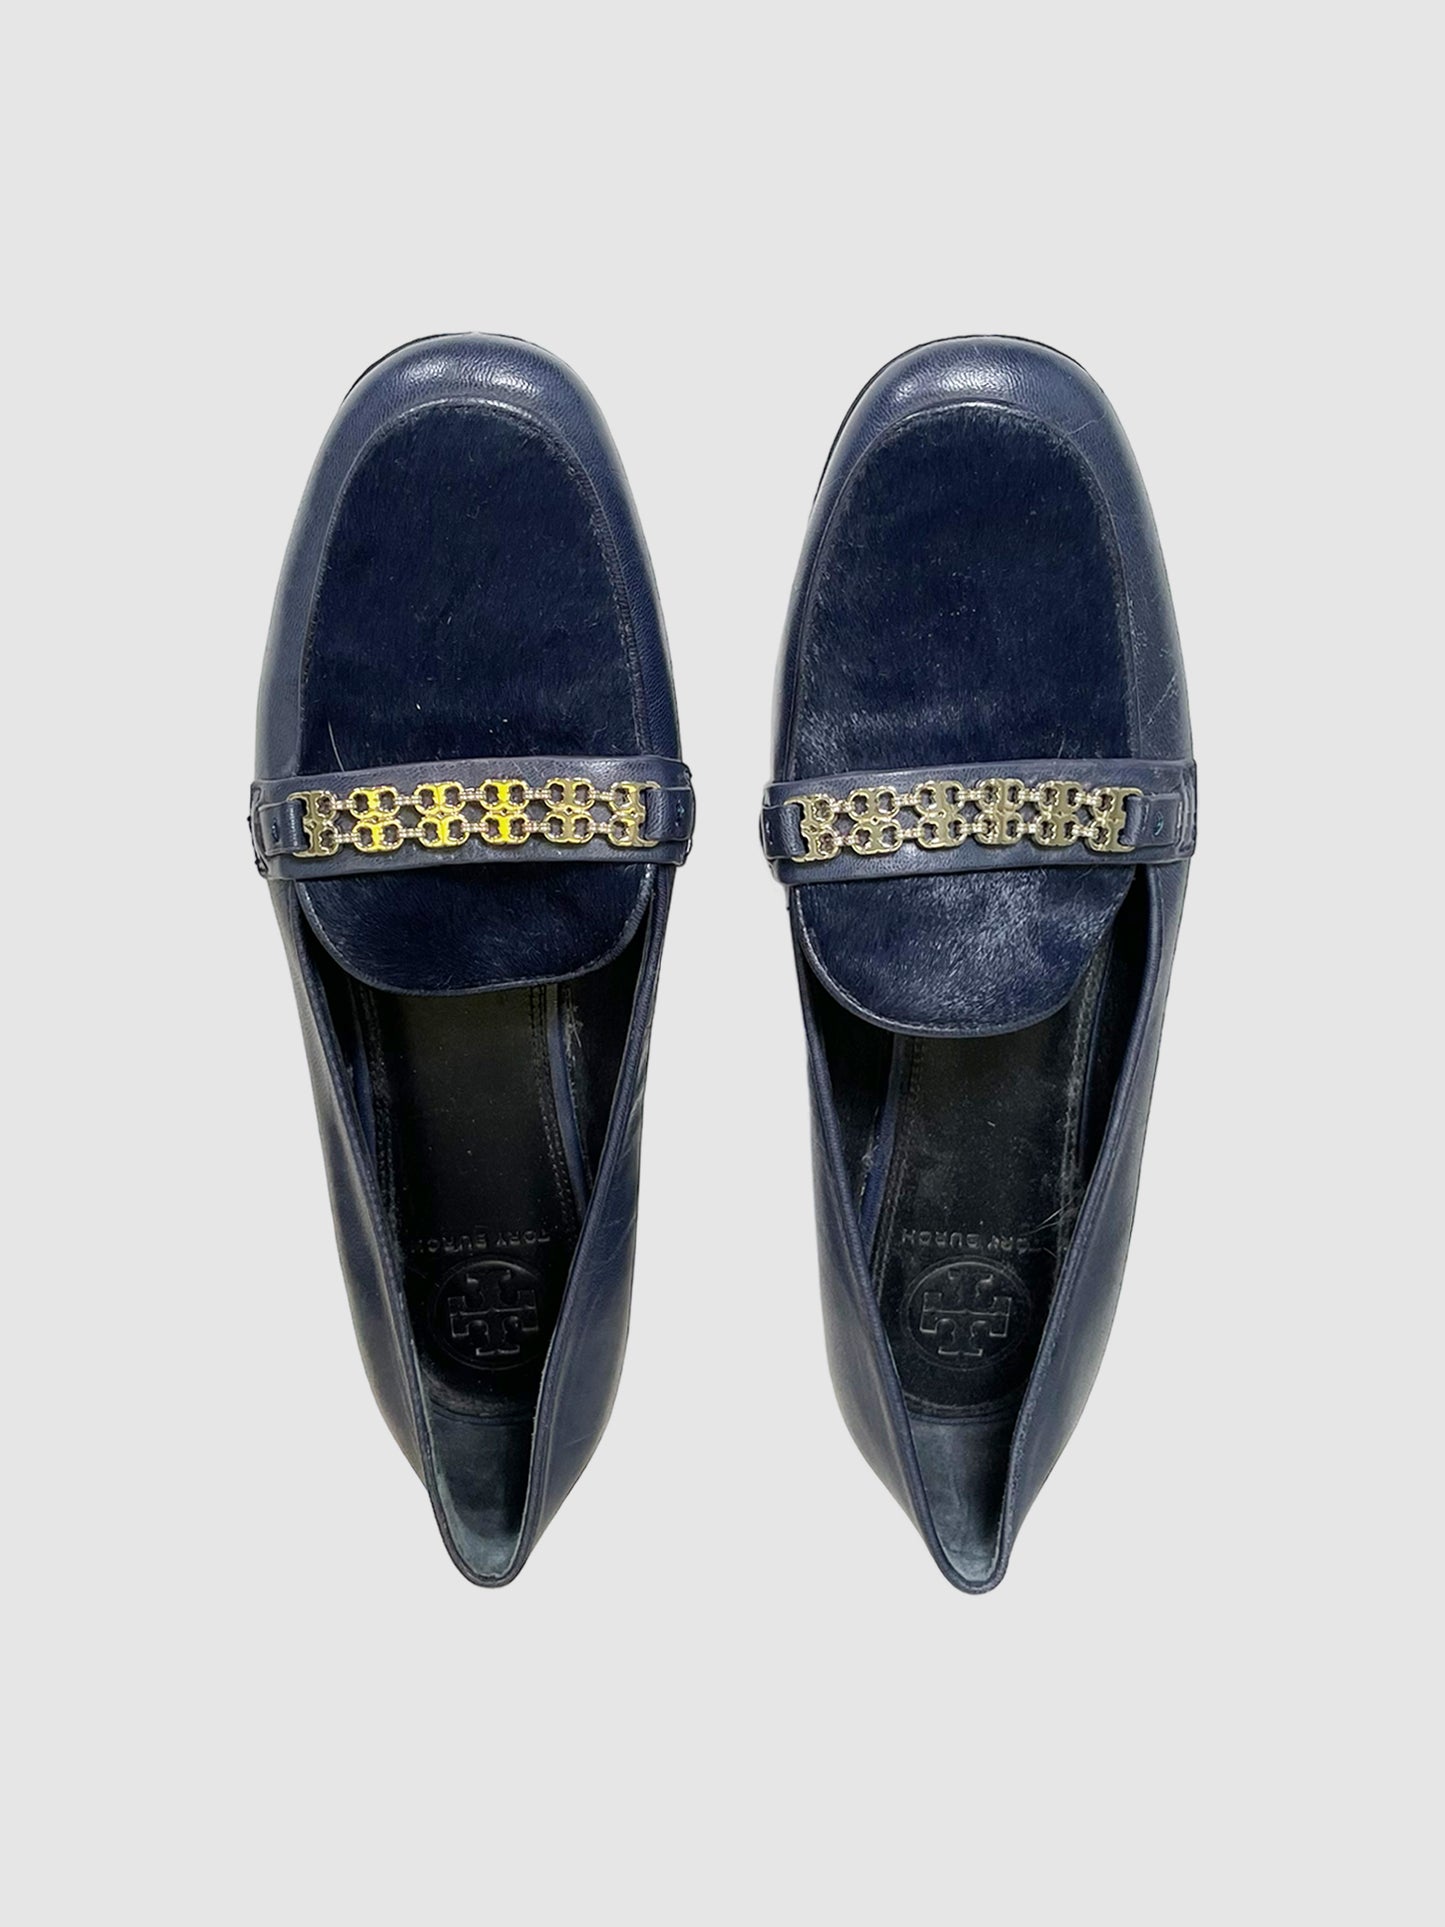 Tory Burch Leather and Pony Hair Loafers - Size 8.5